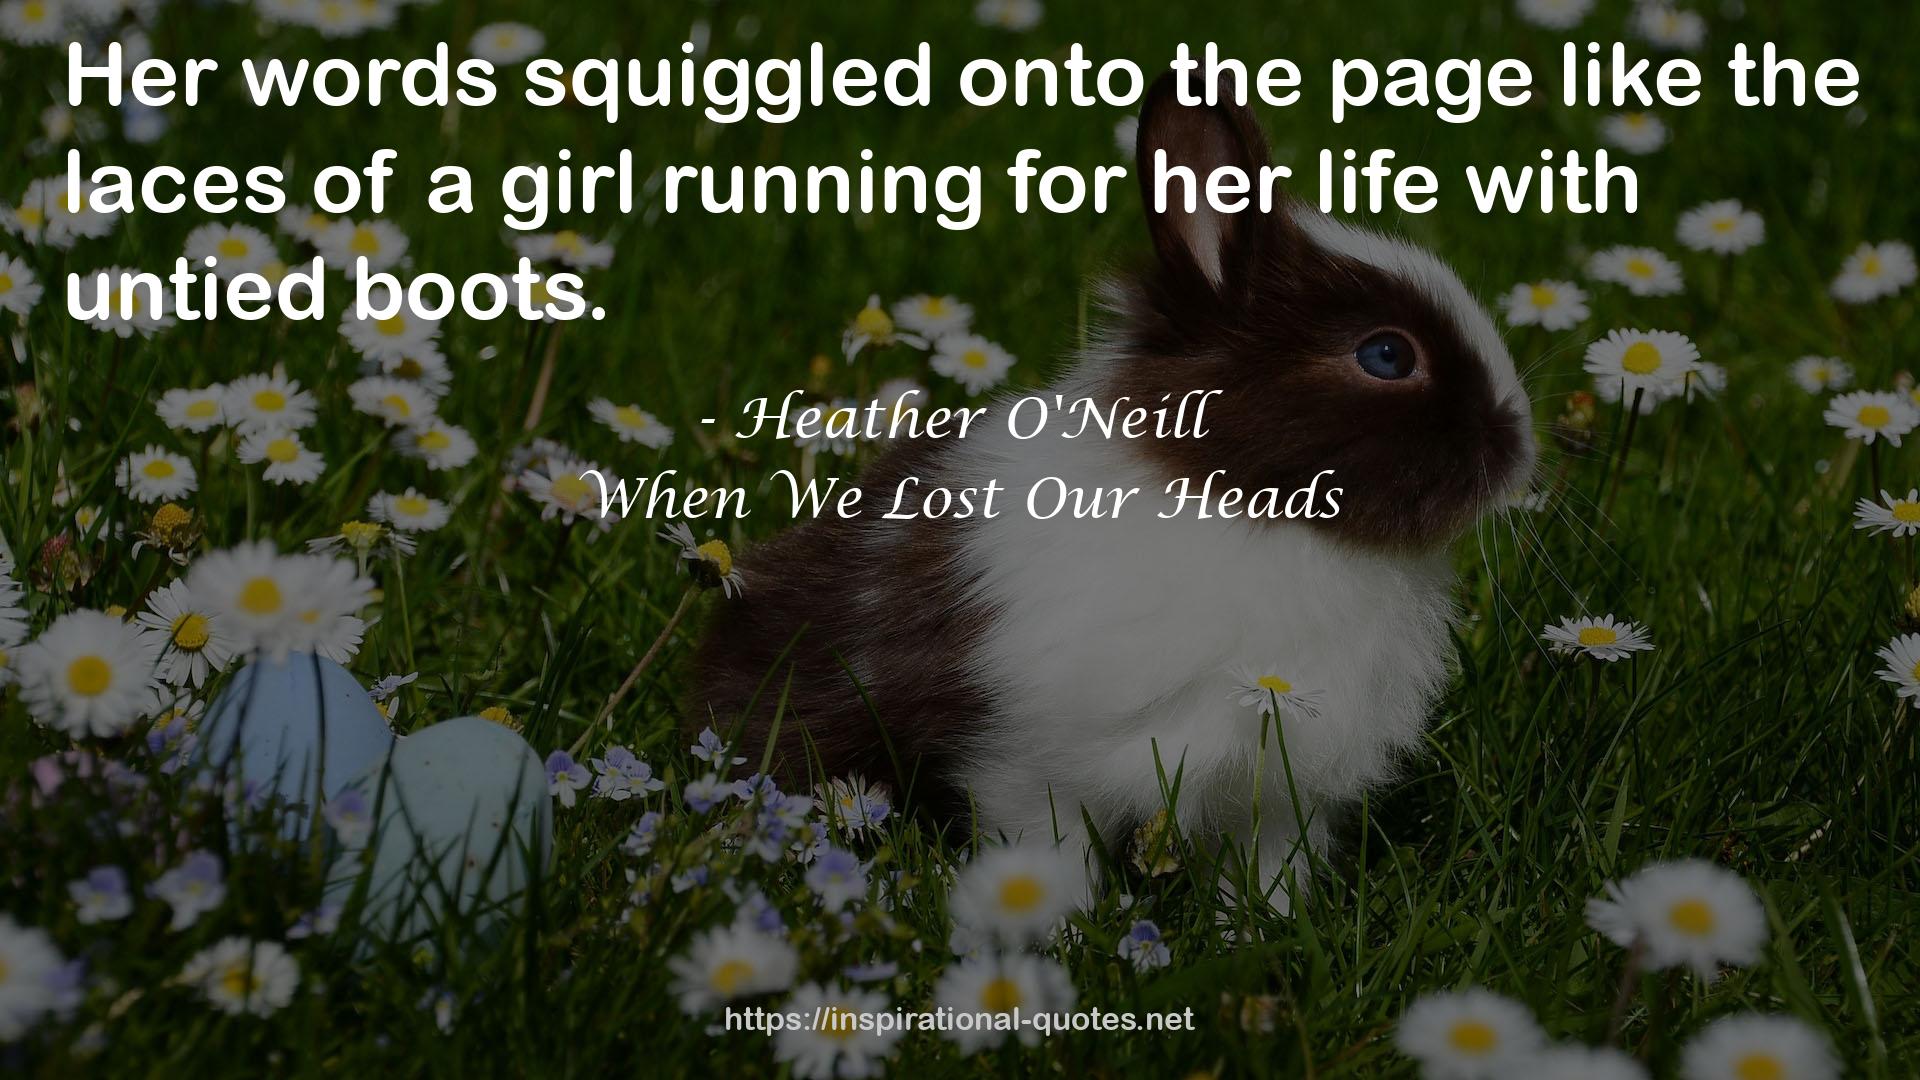 Heather O'Neill QUOTES